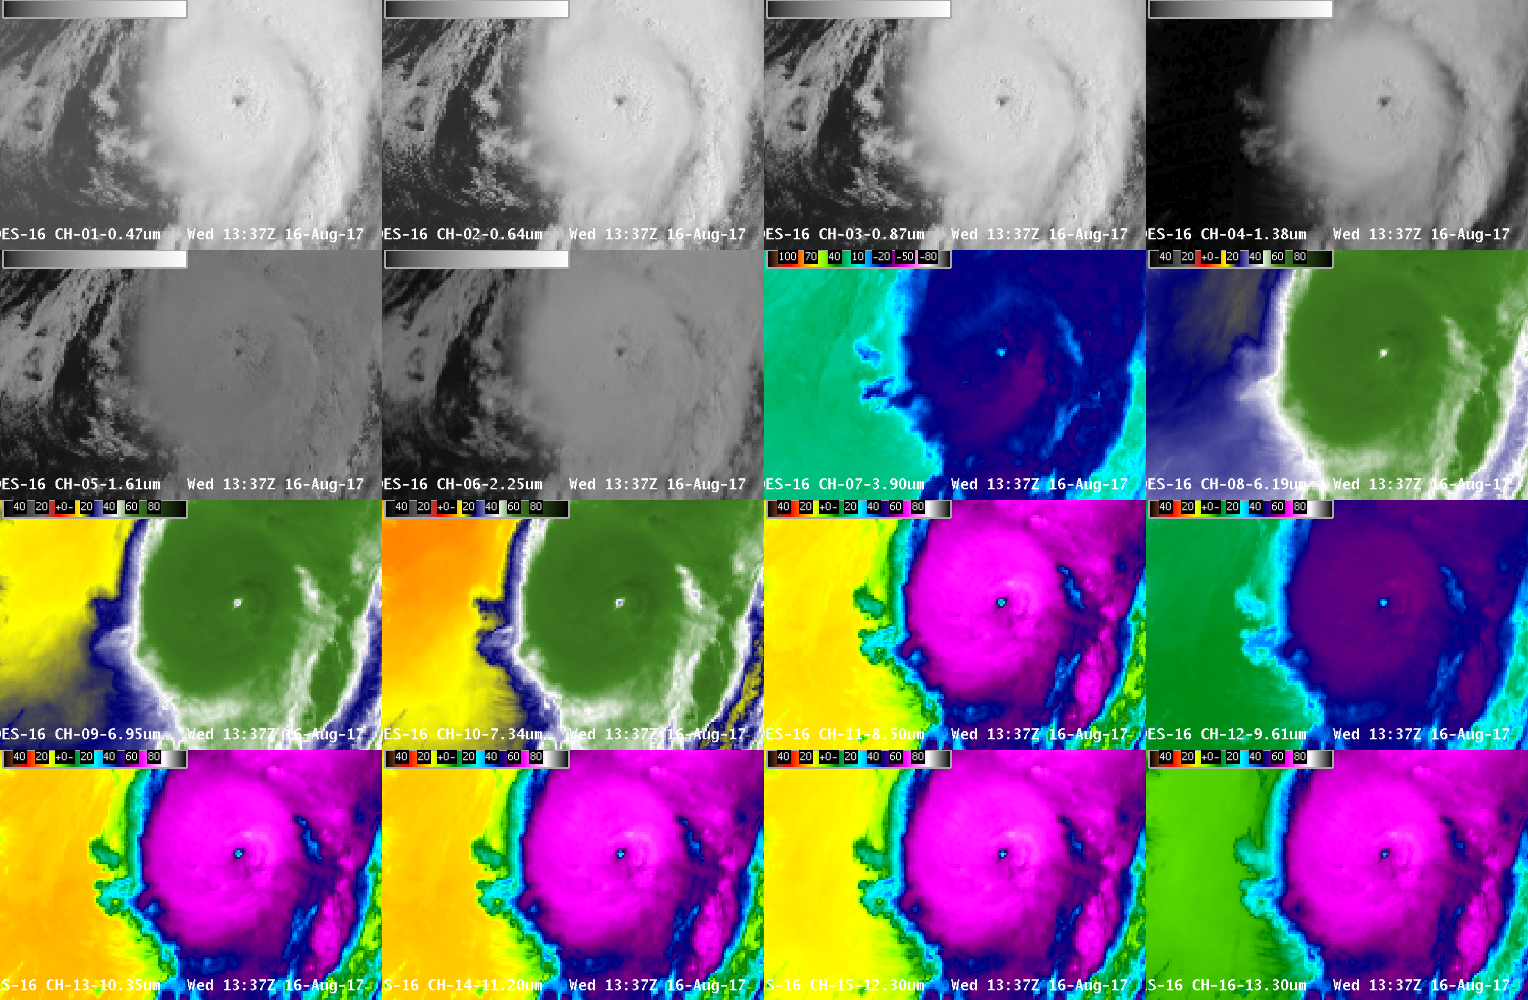 GOES-16 imagery (all 16 ABI Bands) from 1117-1337 UTC, 16 August 2017 [click to play animation]